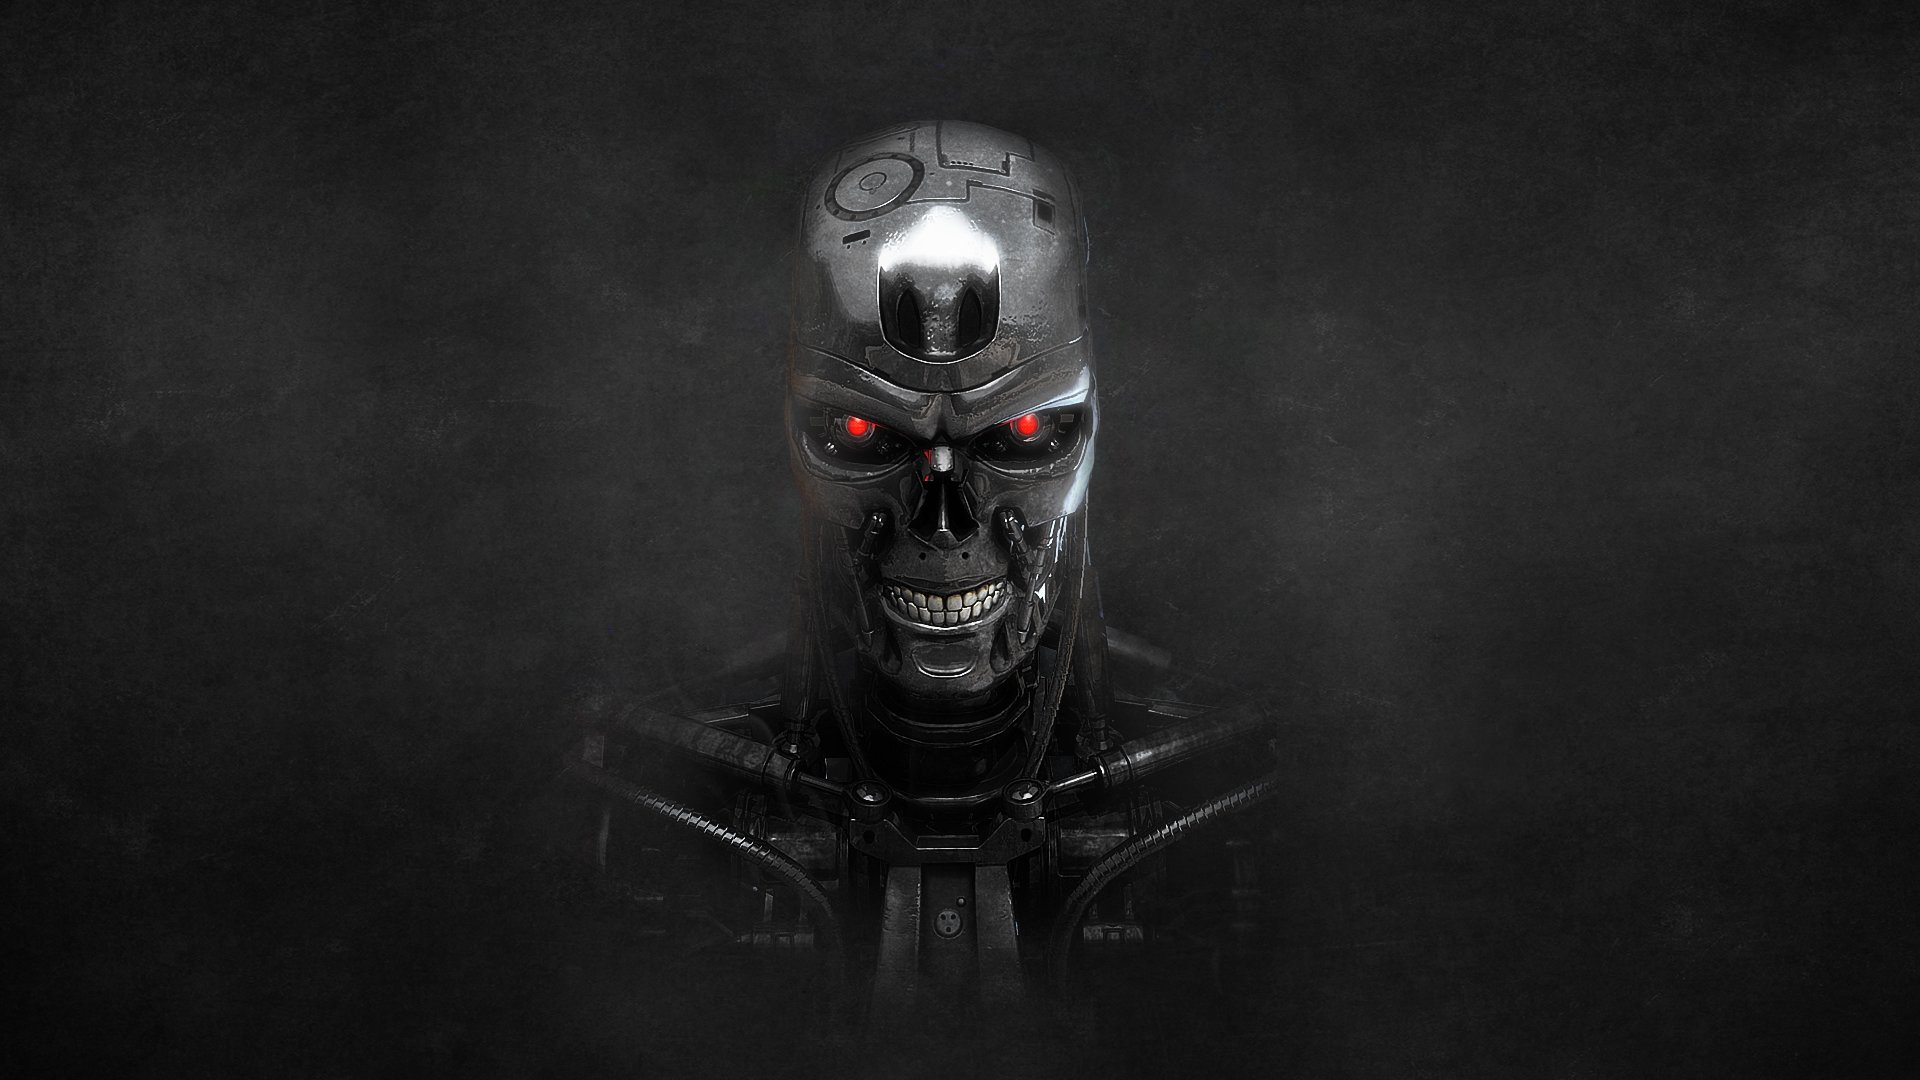 Download 1080p The Terminator computer wallpaper ID:66825 for free